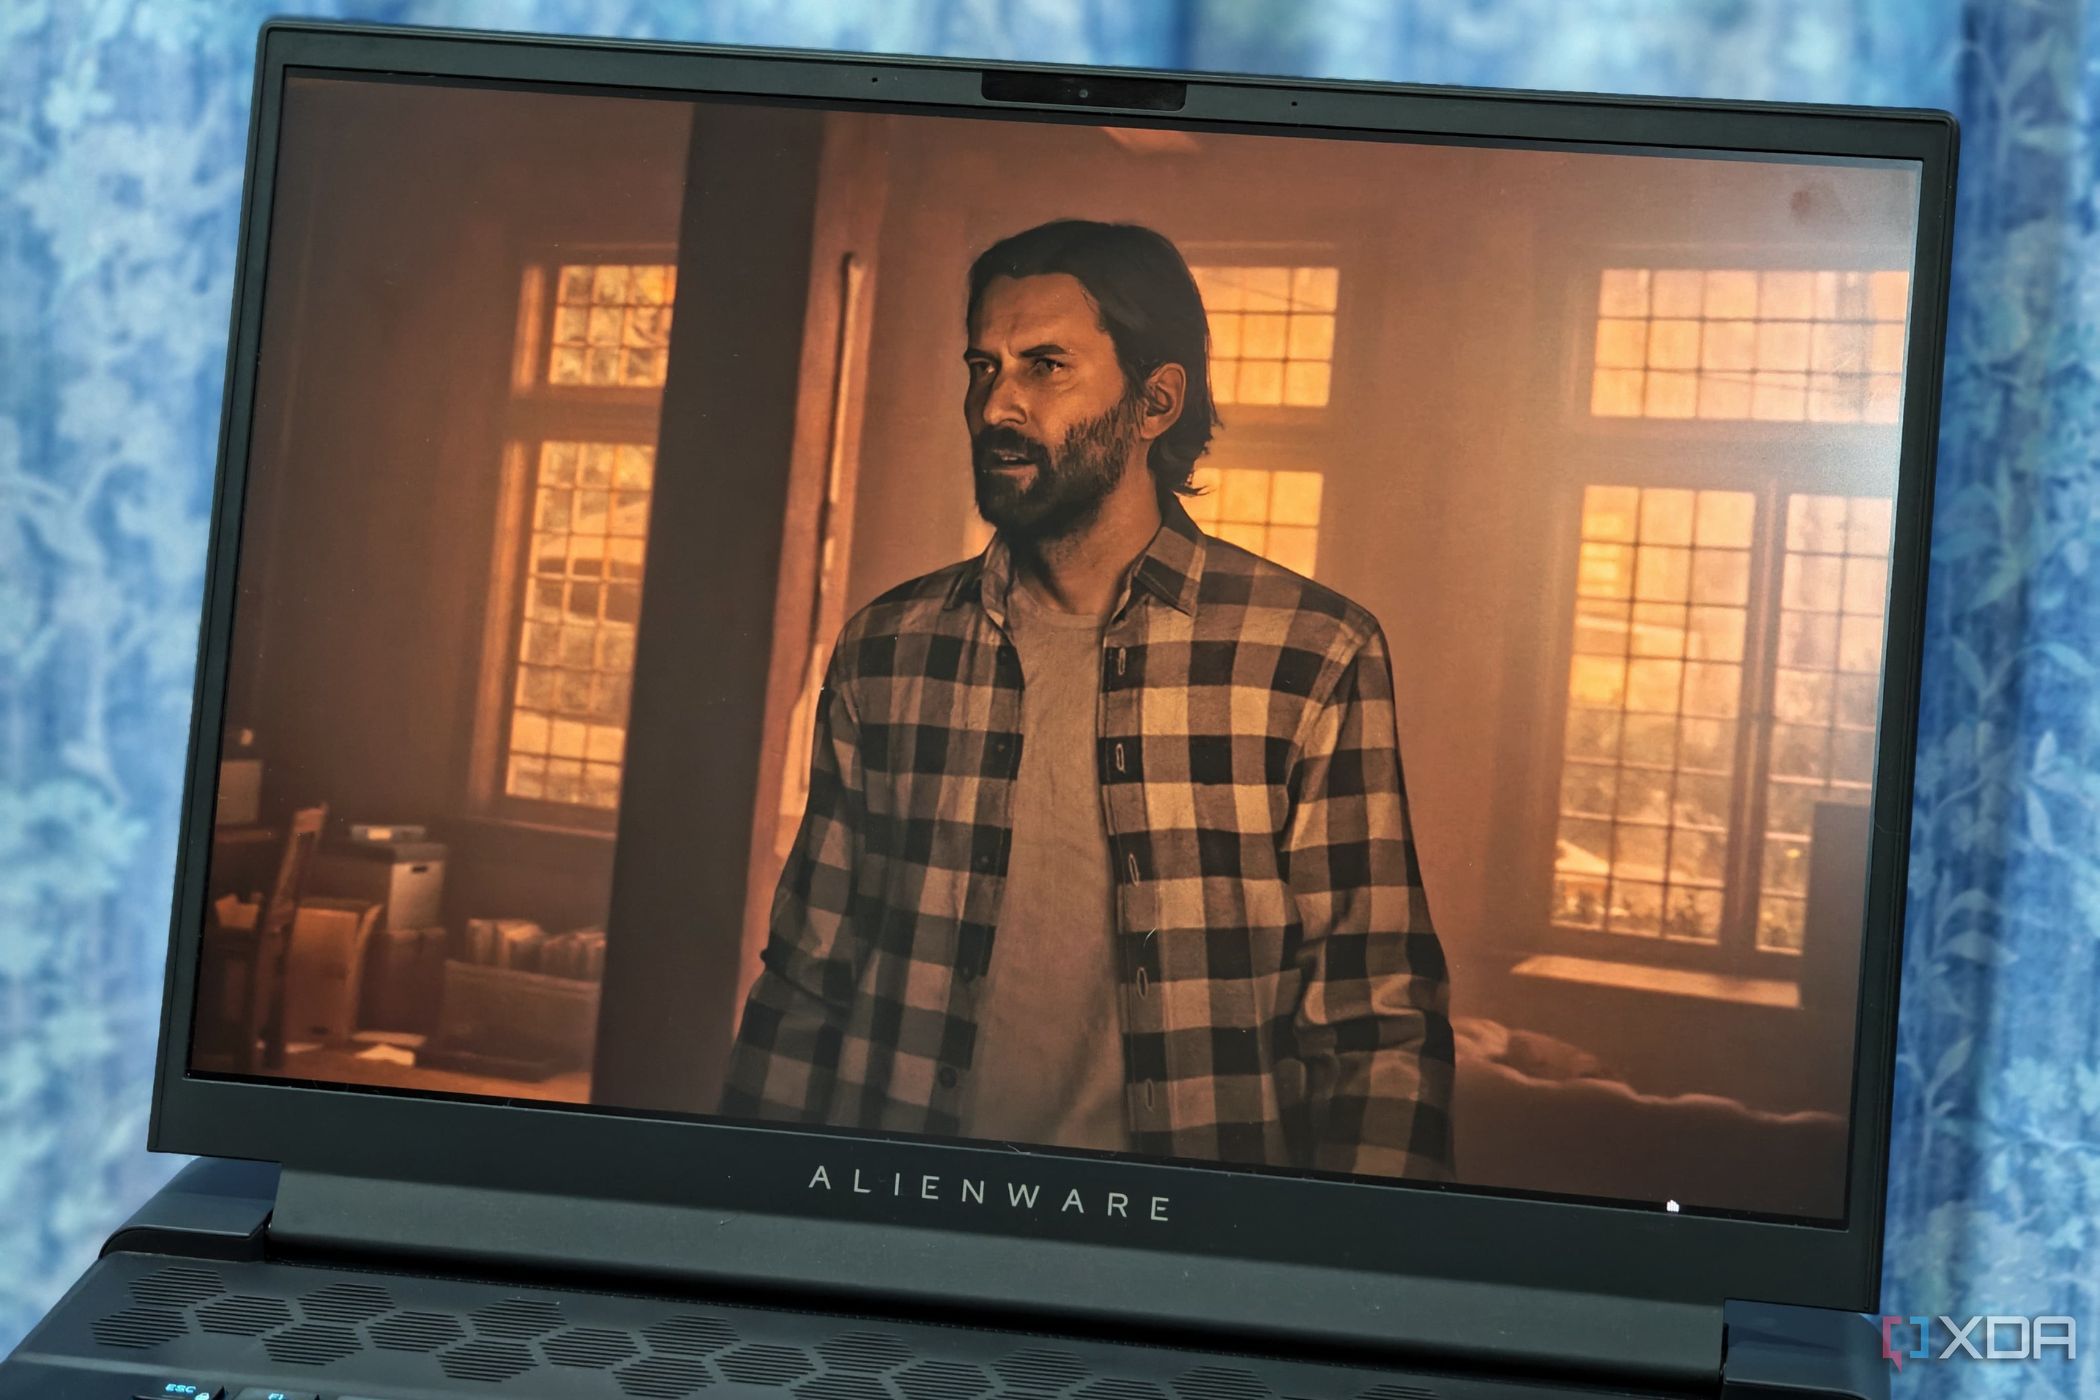 An image showing the Alienware m16 display with Alan Wake 2's screenshot on it.